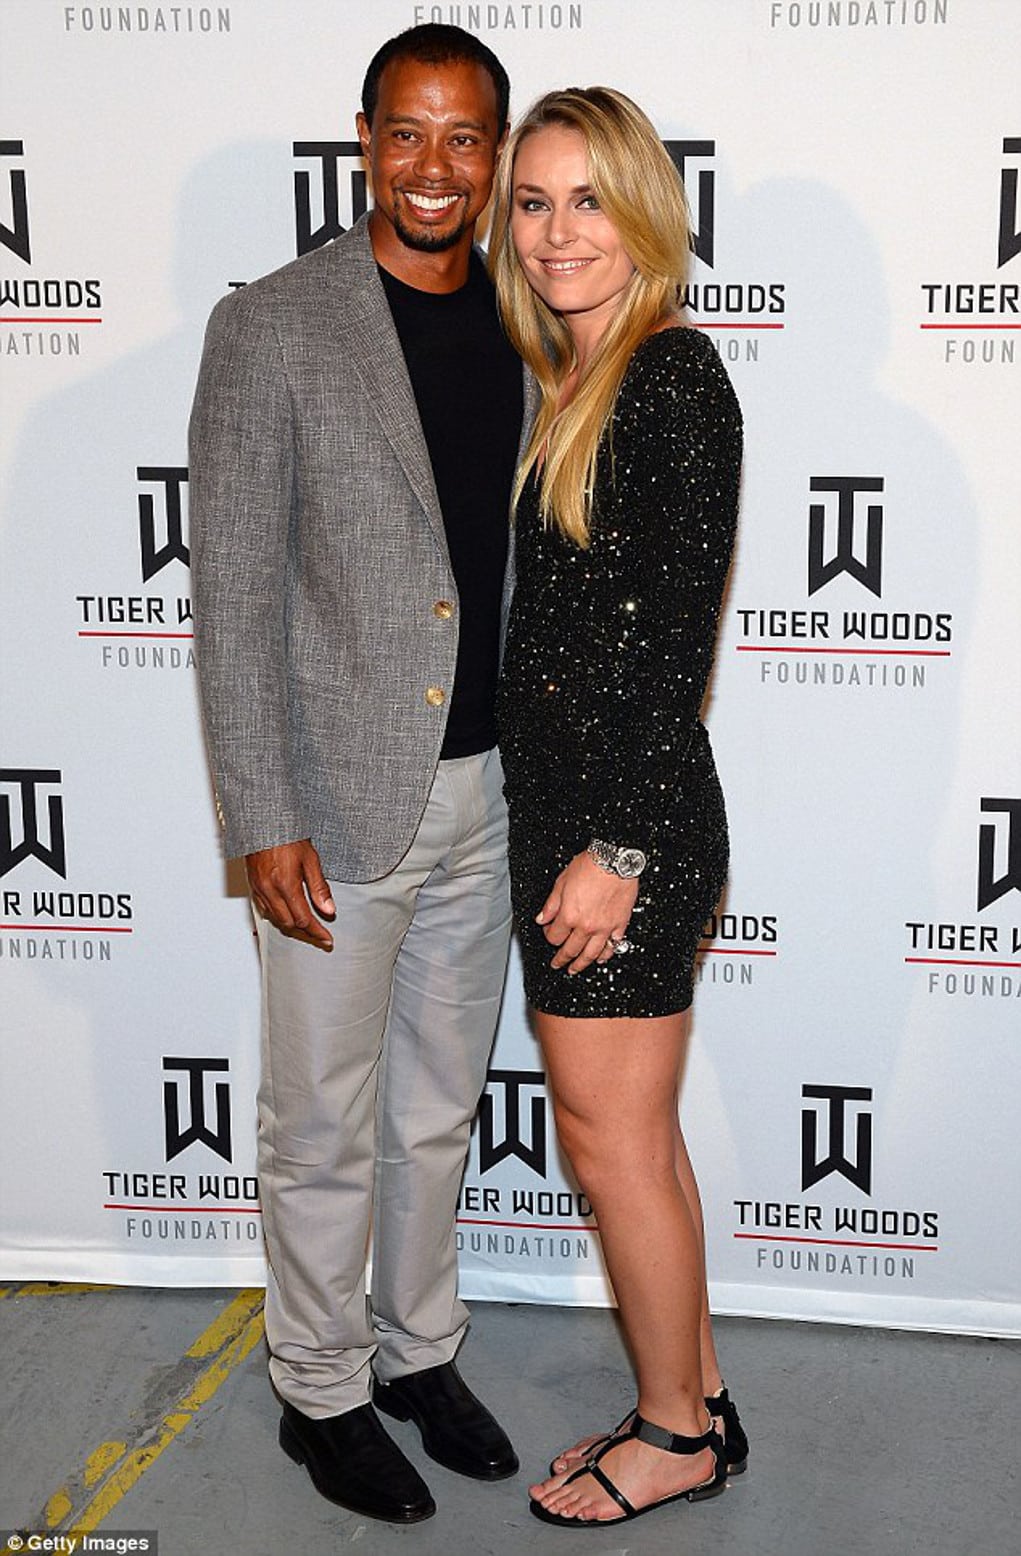 tiger woods affair with friend ex wife 2